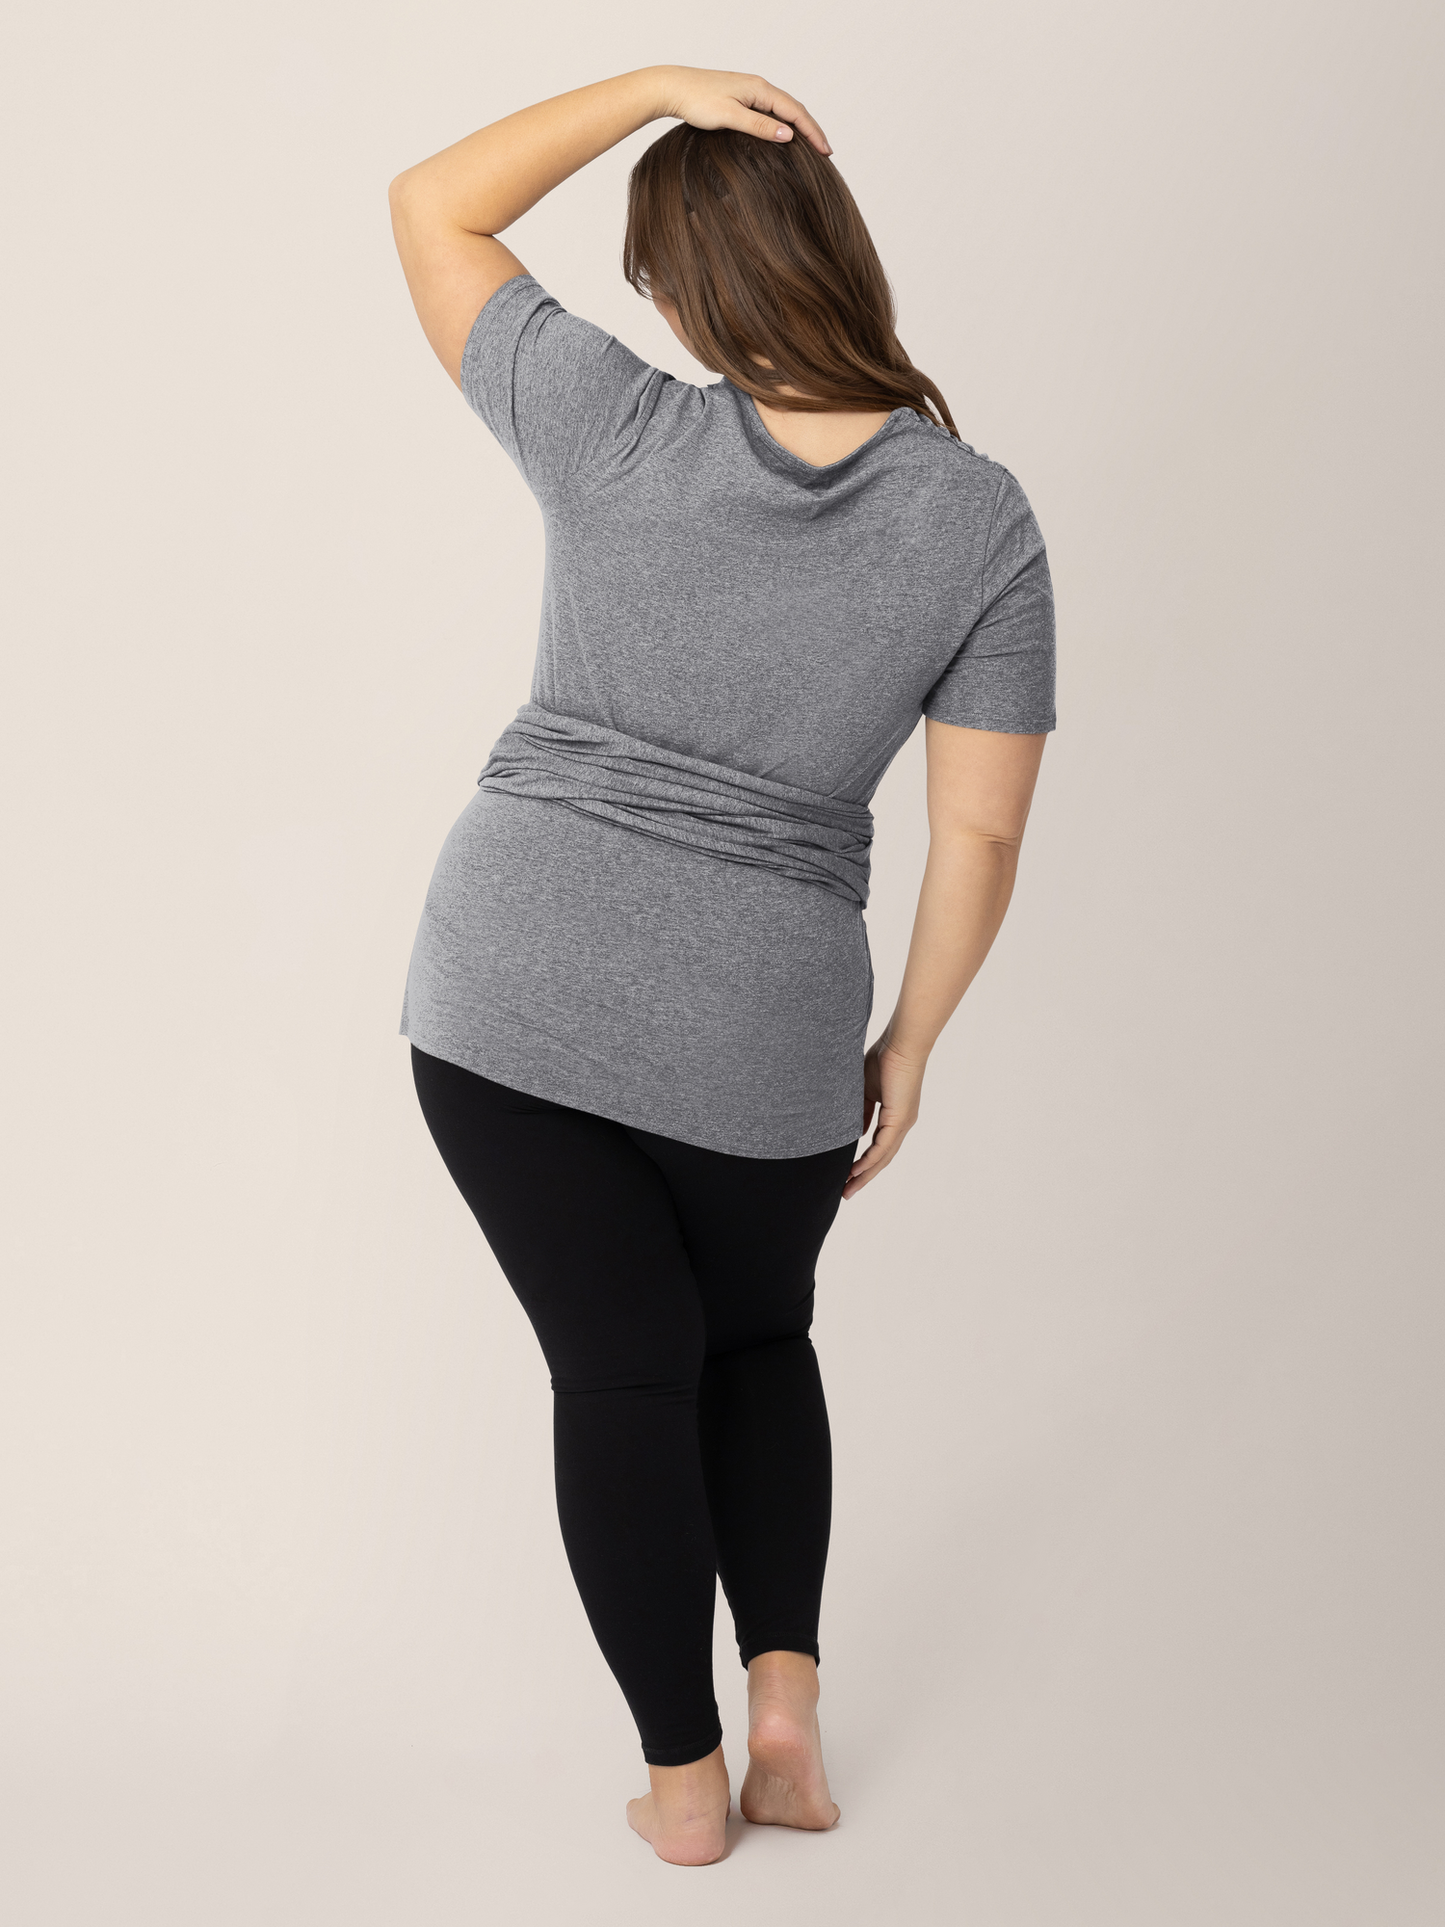 Back view of a model wearing the Organic Cotton Skin to Skin Wrap Top in Charcoal Grey Heather